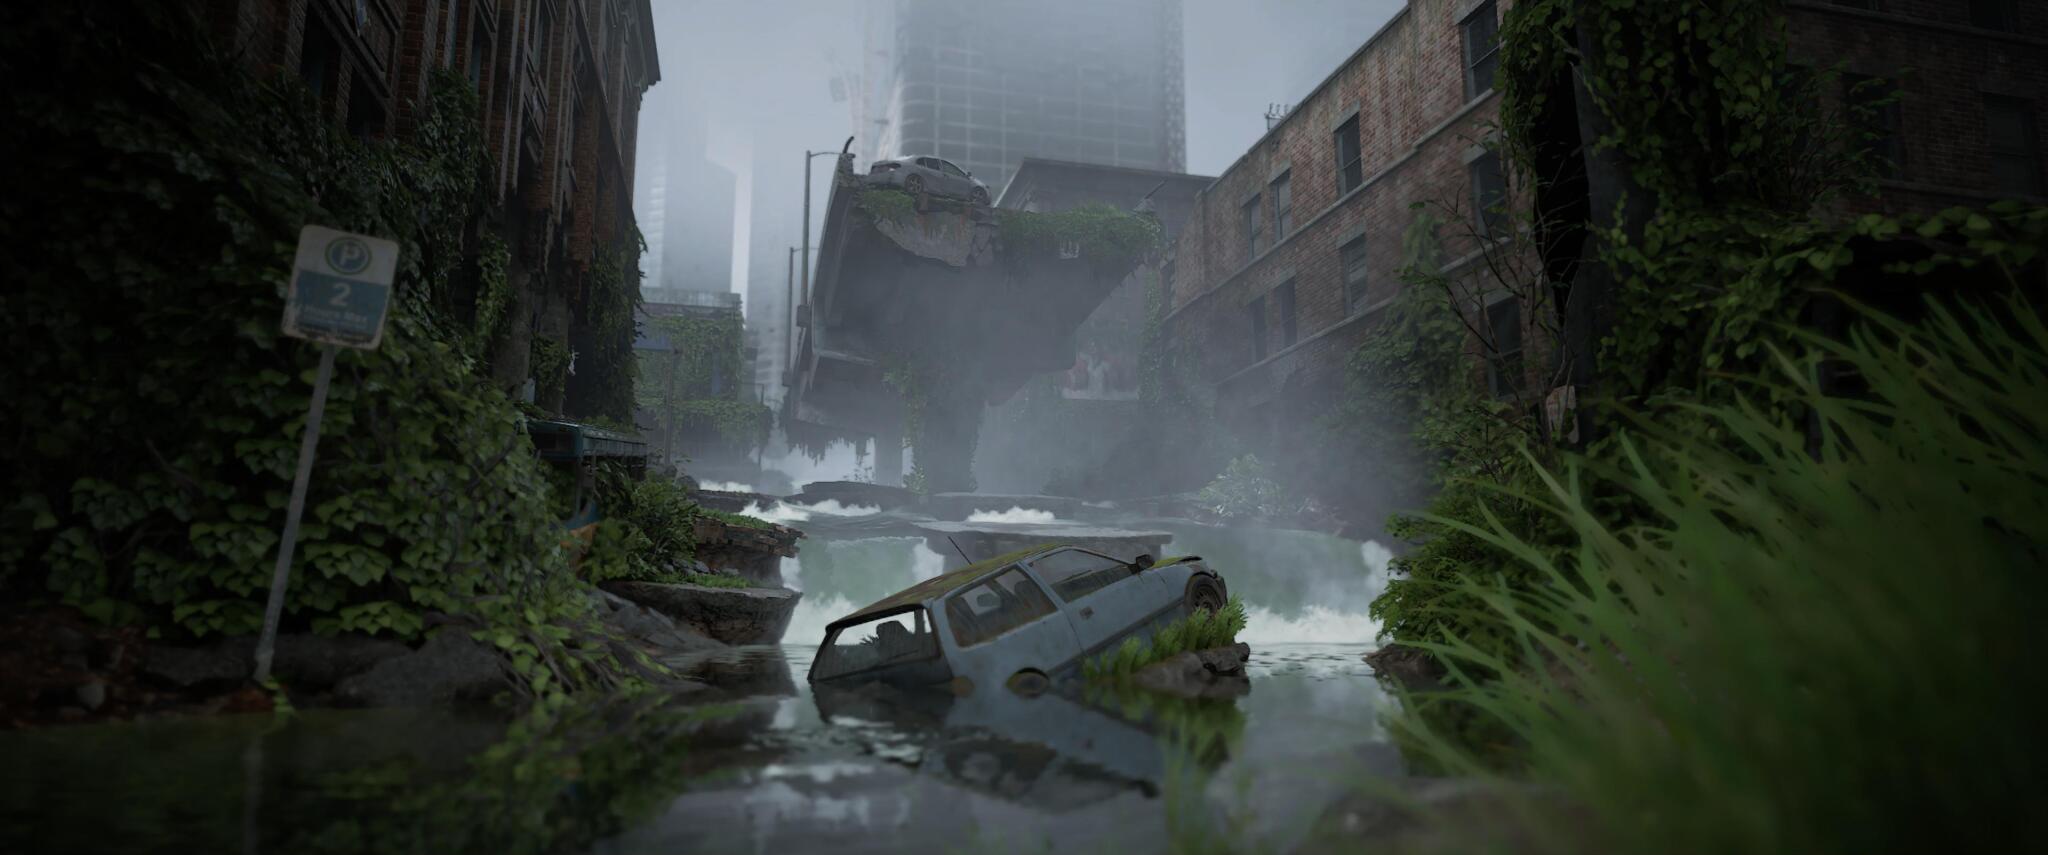 The Flooded City, in "The Last of Us: Part II", captured by Marty Friedel